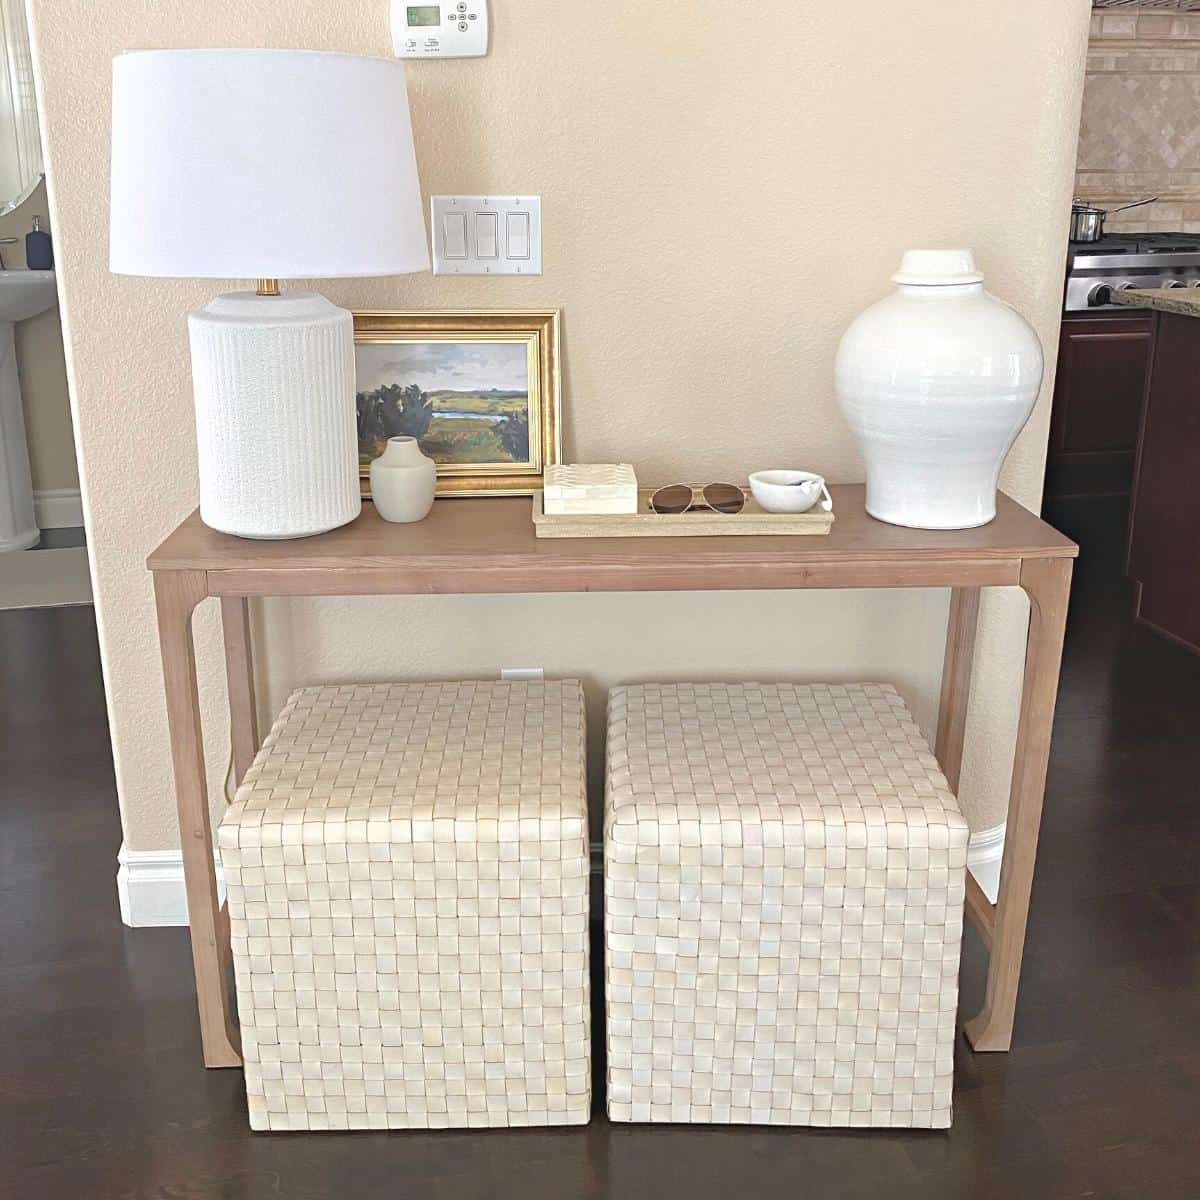 Console table styled with a white textured lamp on the left, small framed art and a tray of home decor accessories in the middle and a large white vase on the right